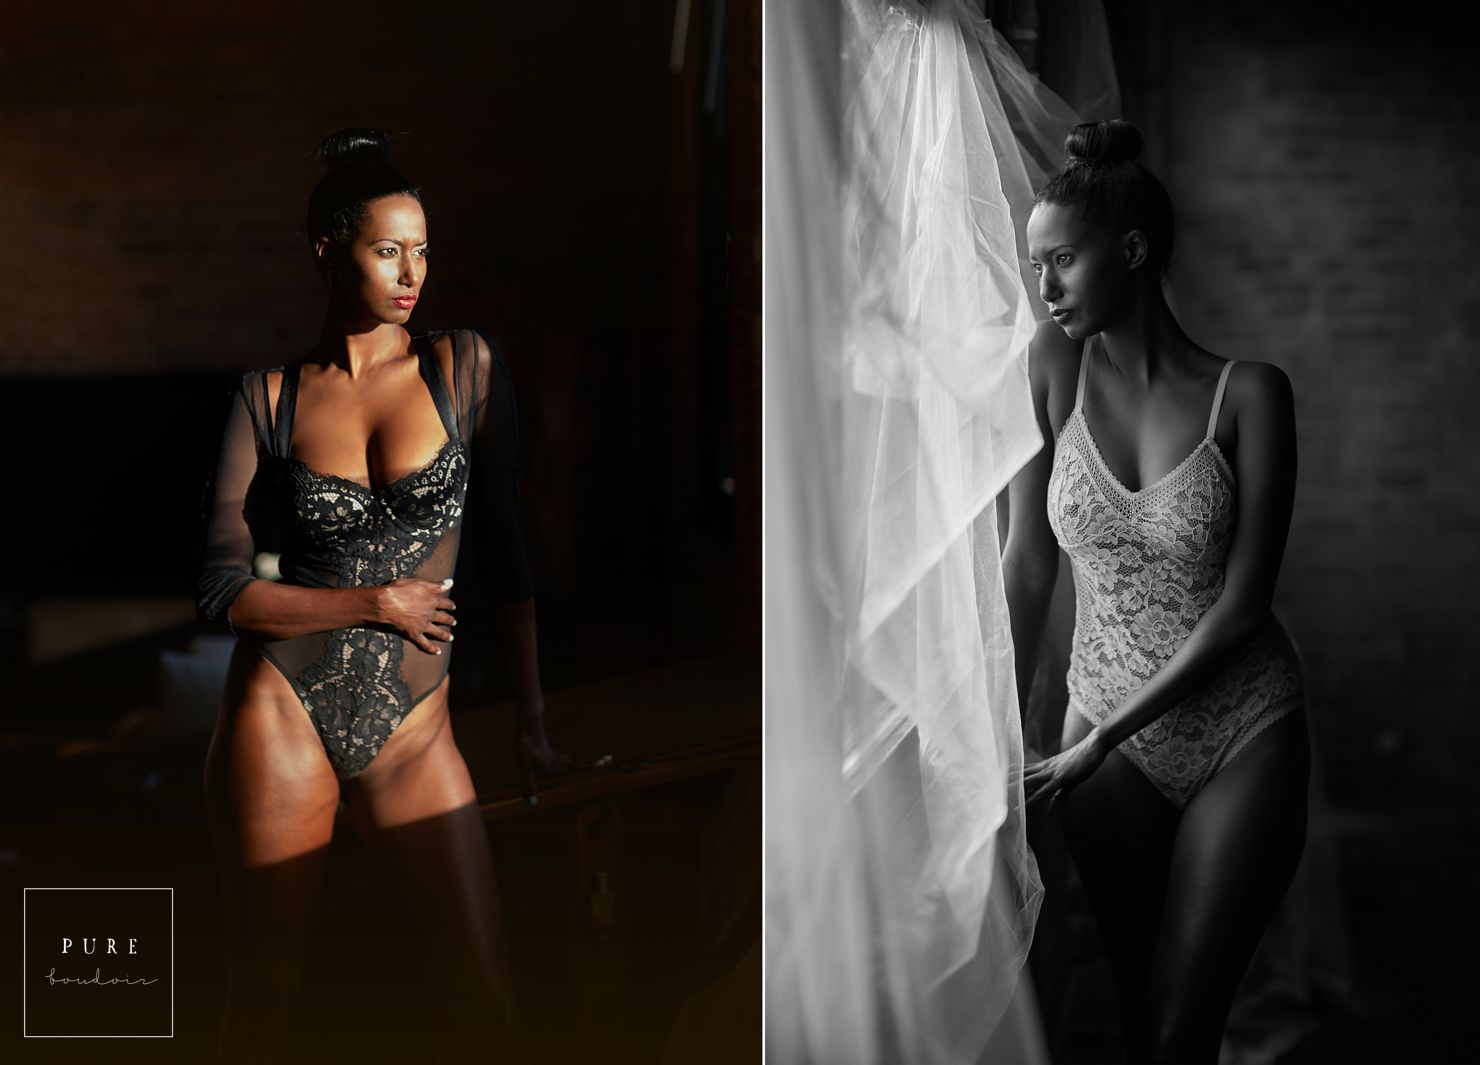 chicago boudoir lingerie bride - Chicago Boudoir Session. It Is All About You.